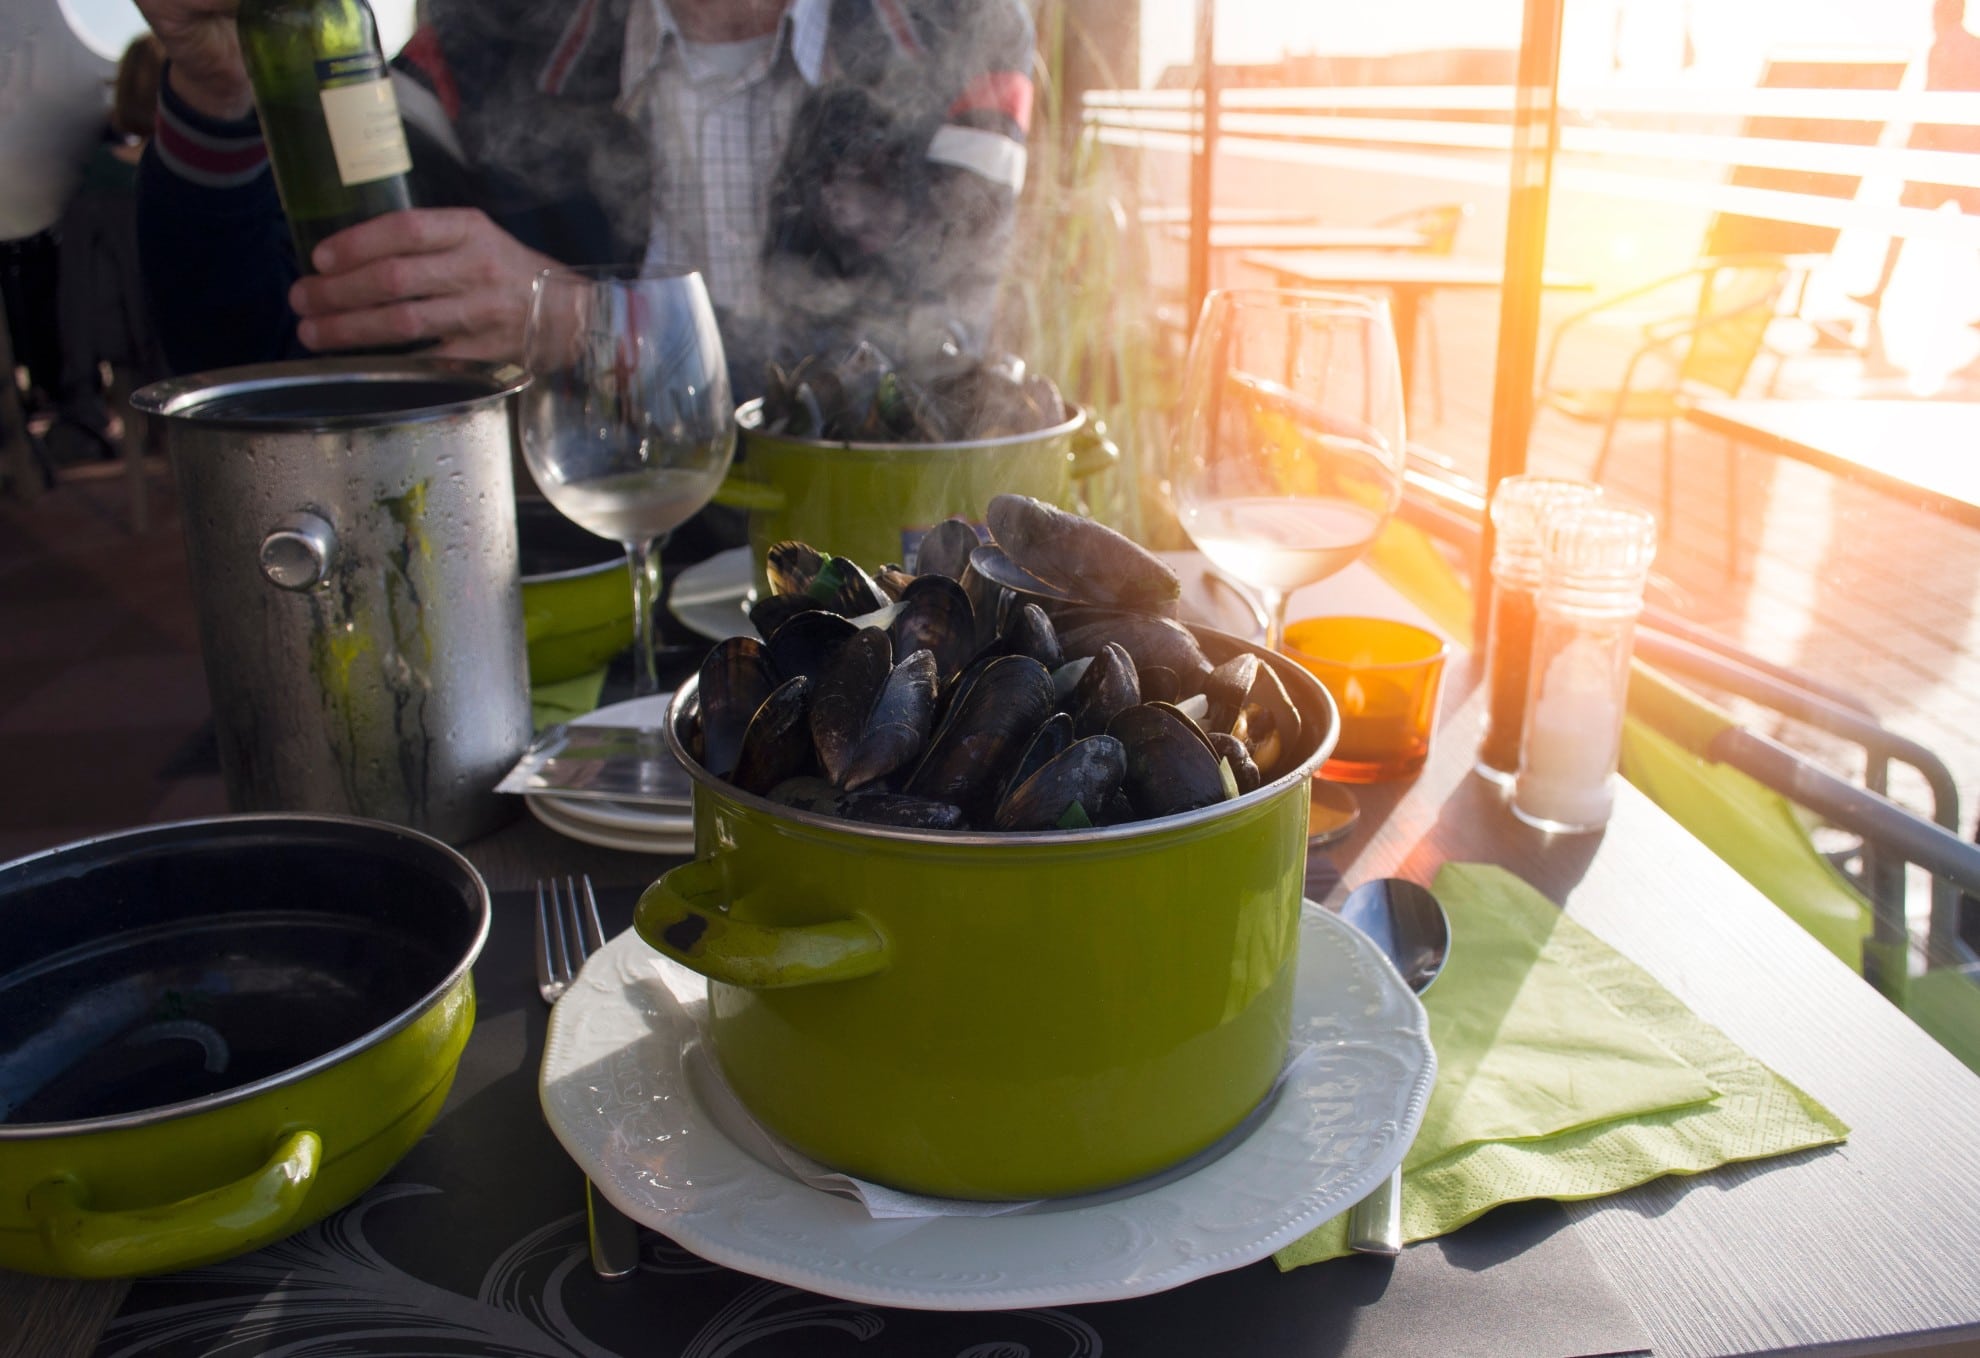 Green Mussels vs. Black Mussels: What’s The Difference?